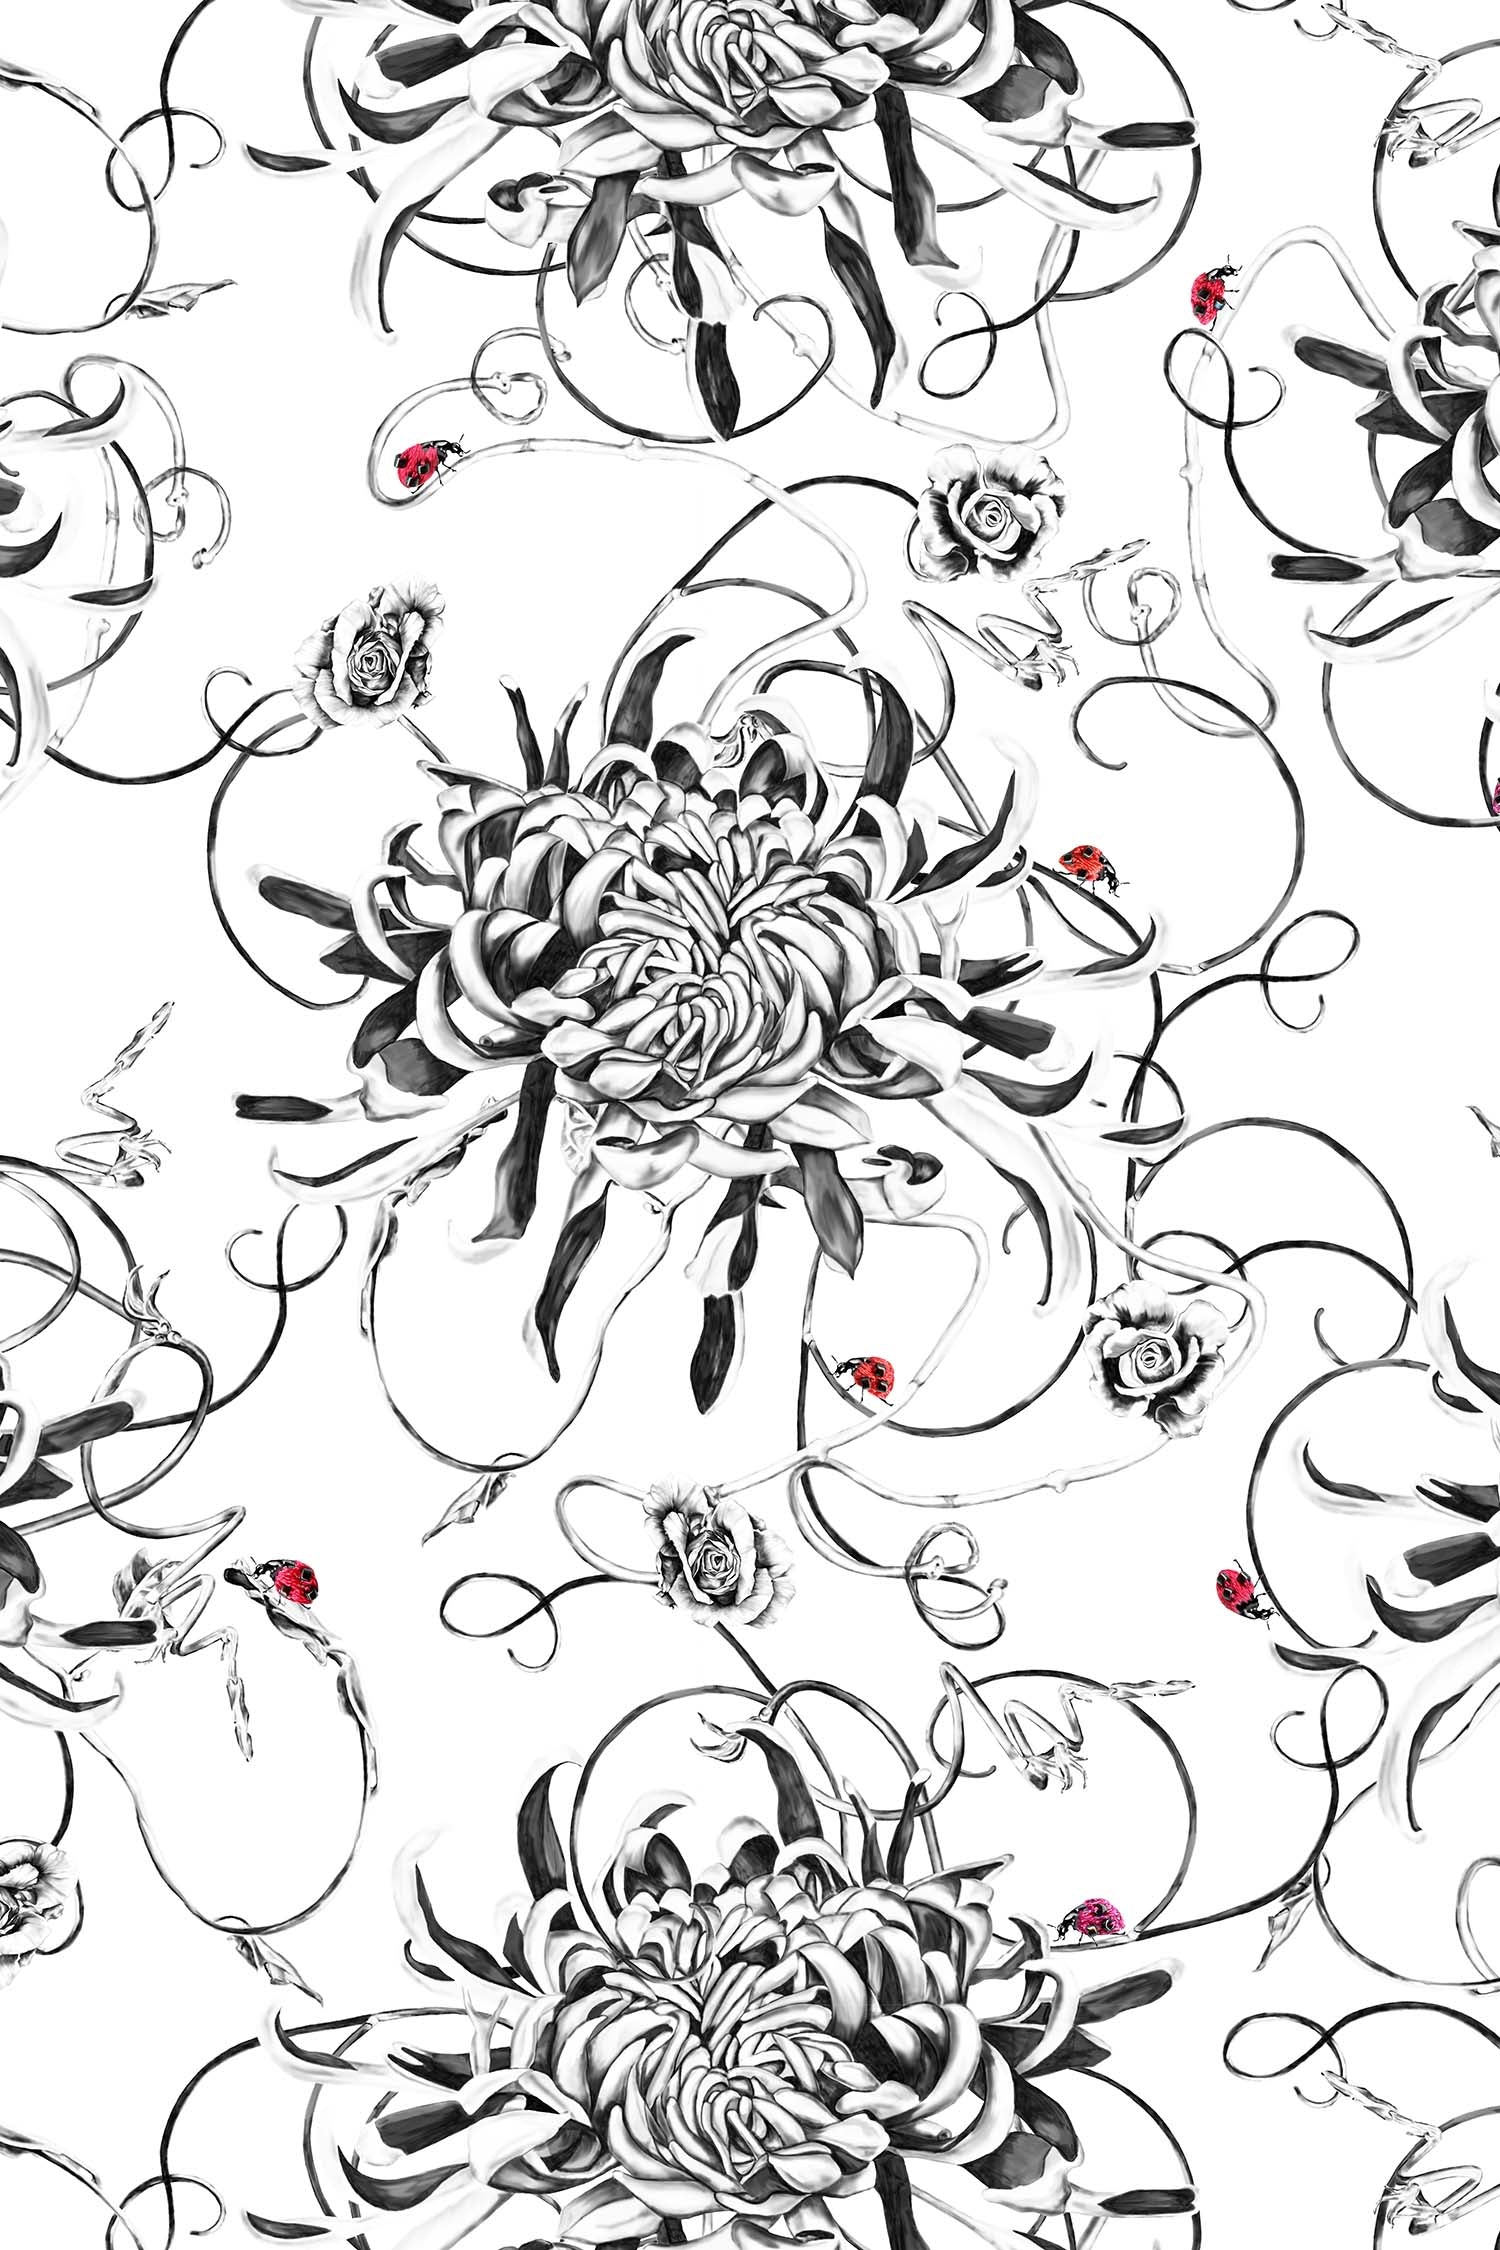  Monochrome floral wallpaper with red ladybirds close up